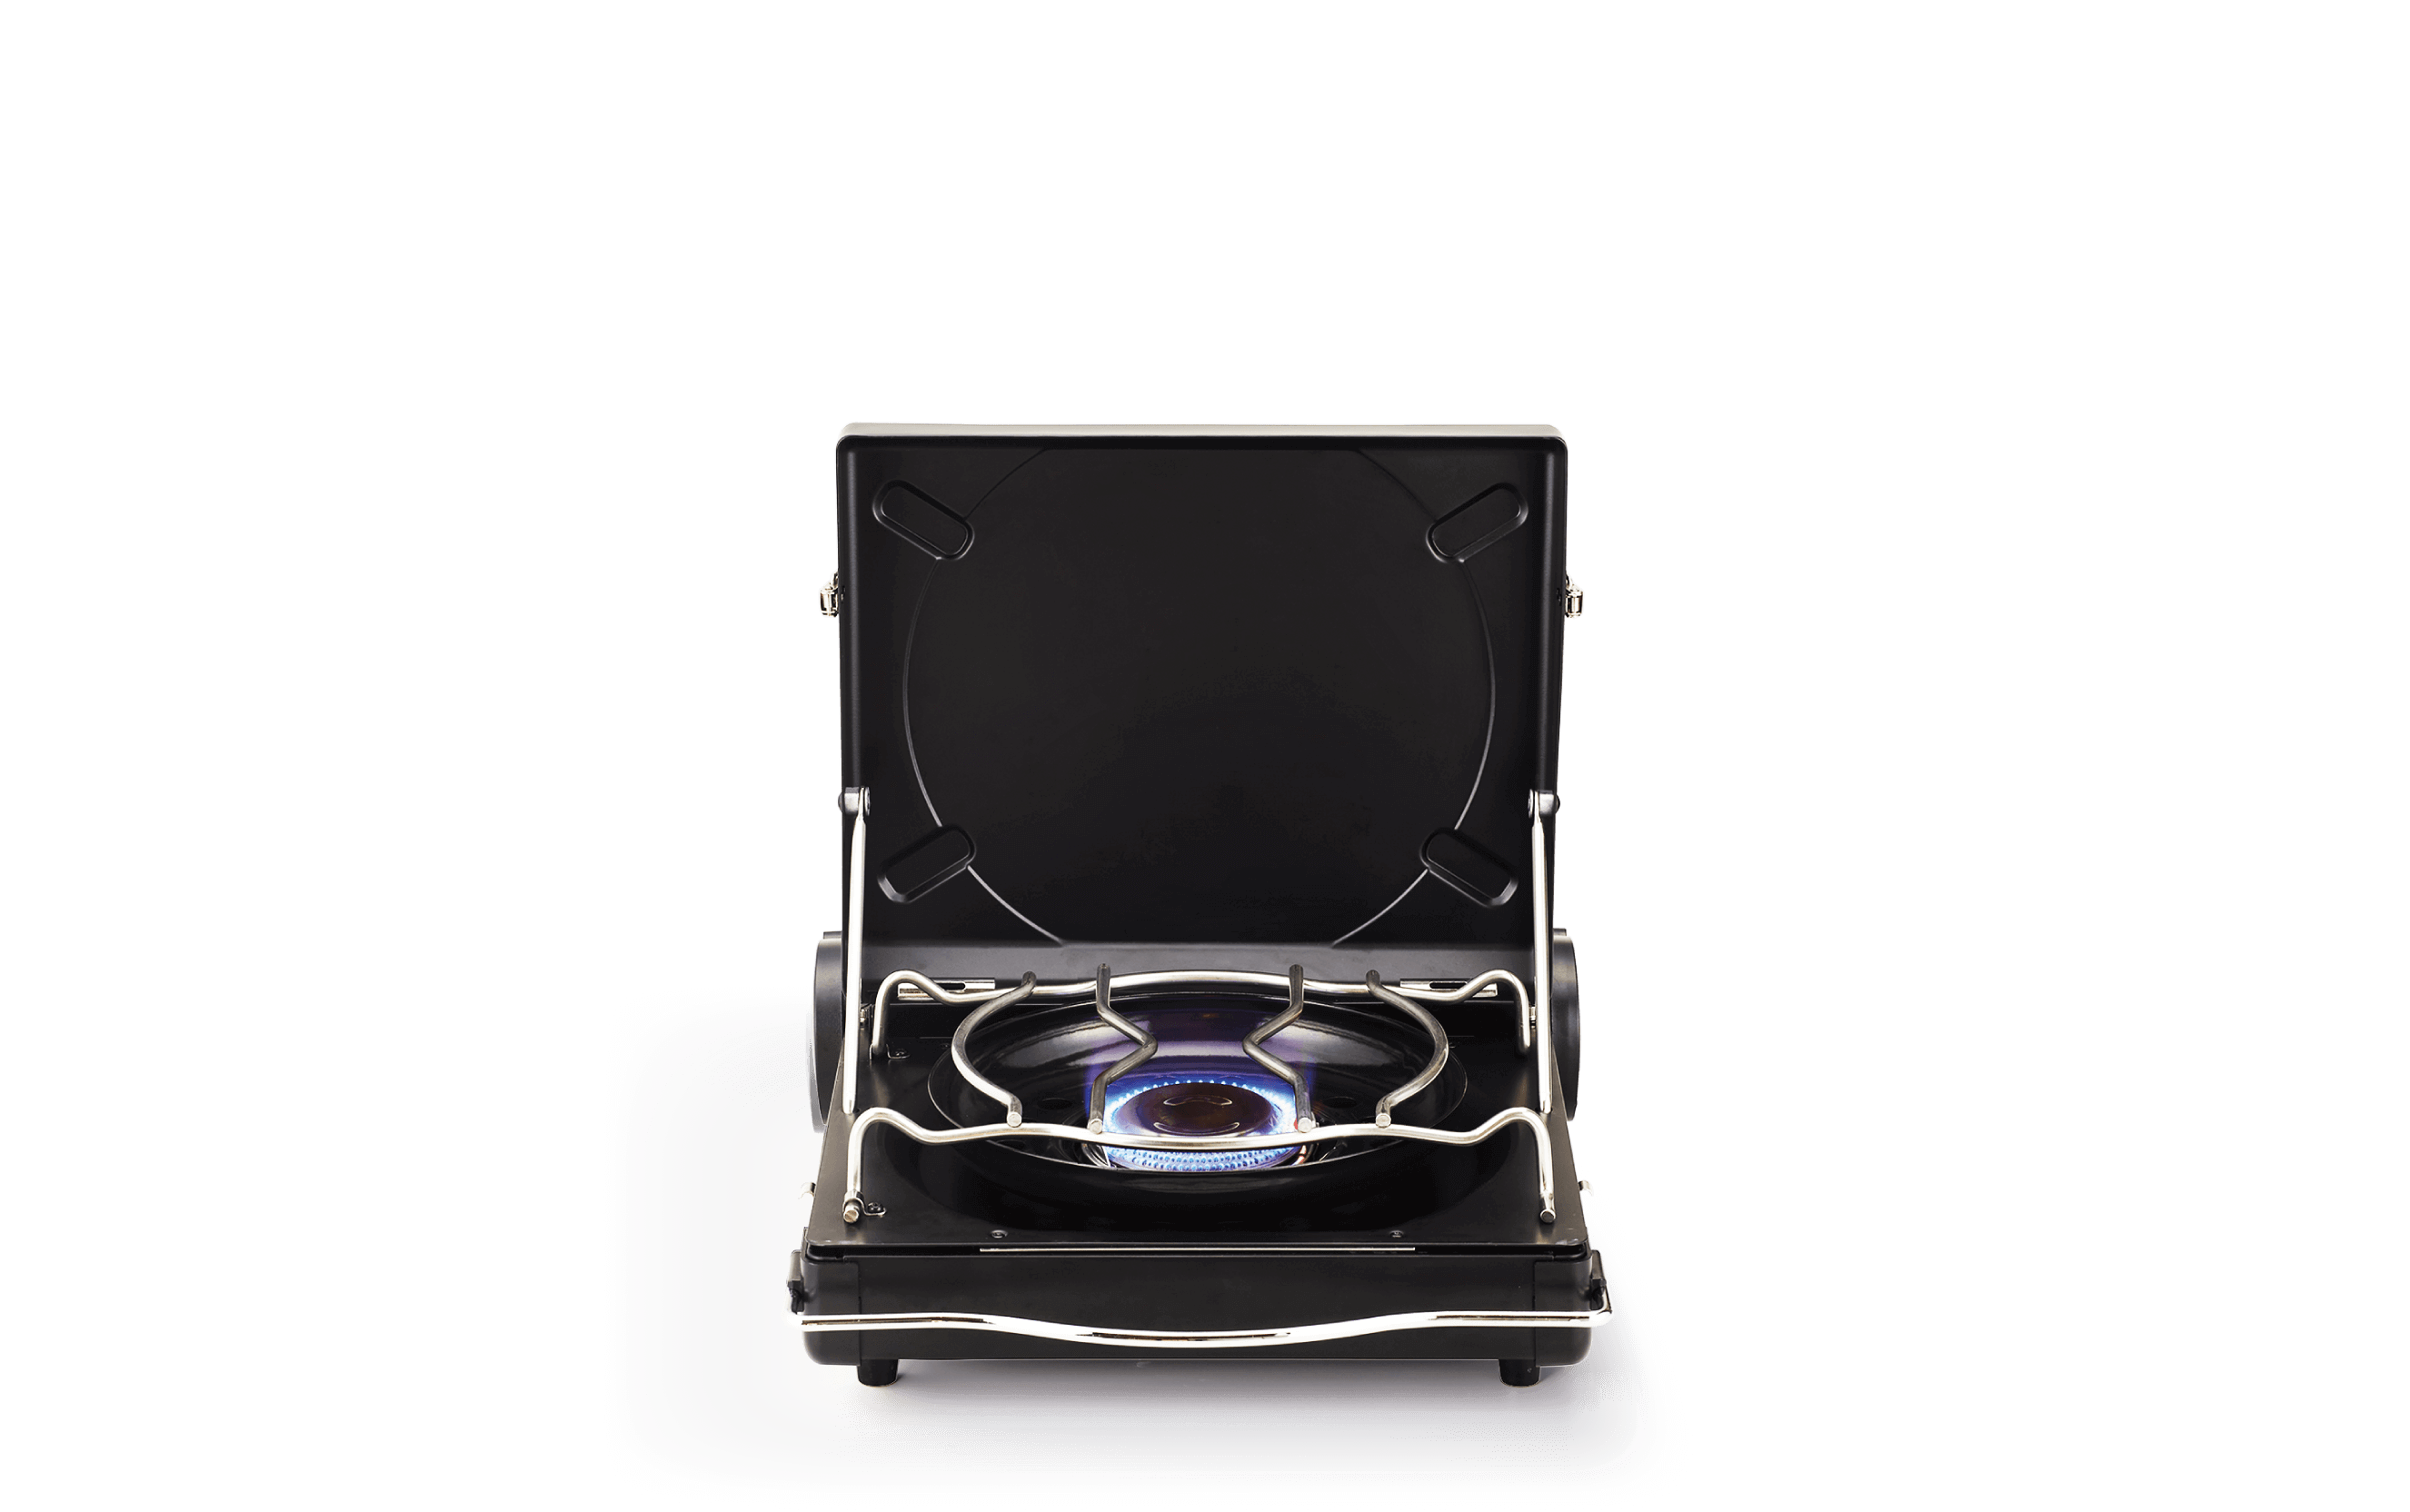 LUXE CAMP STOVE